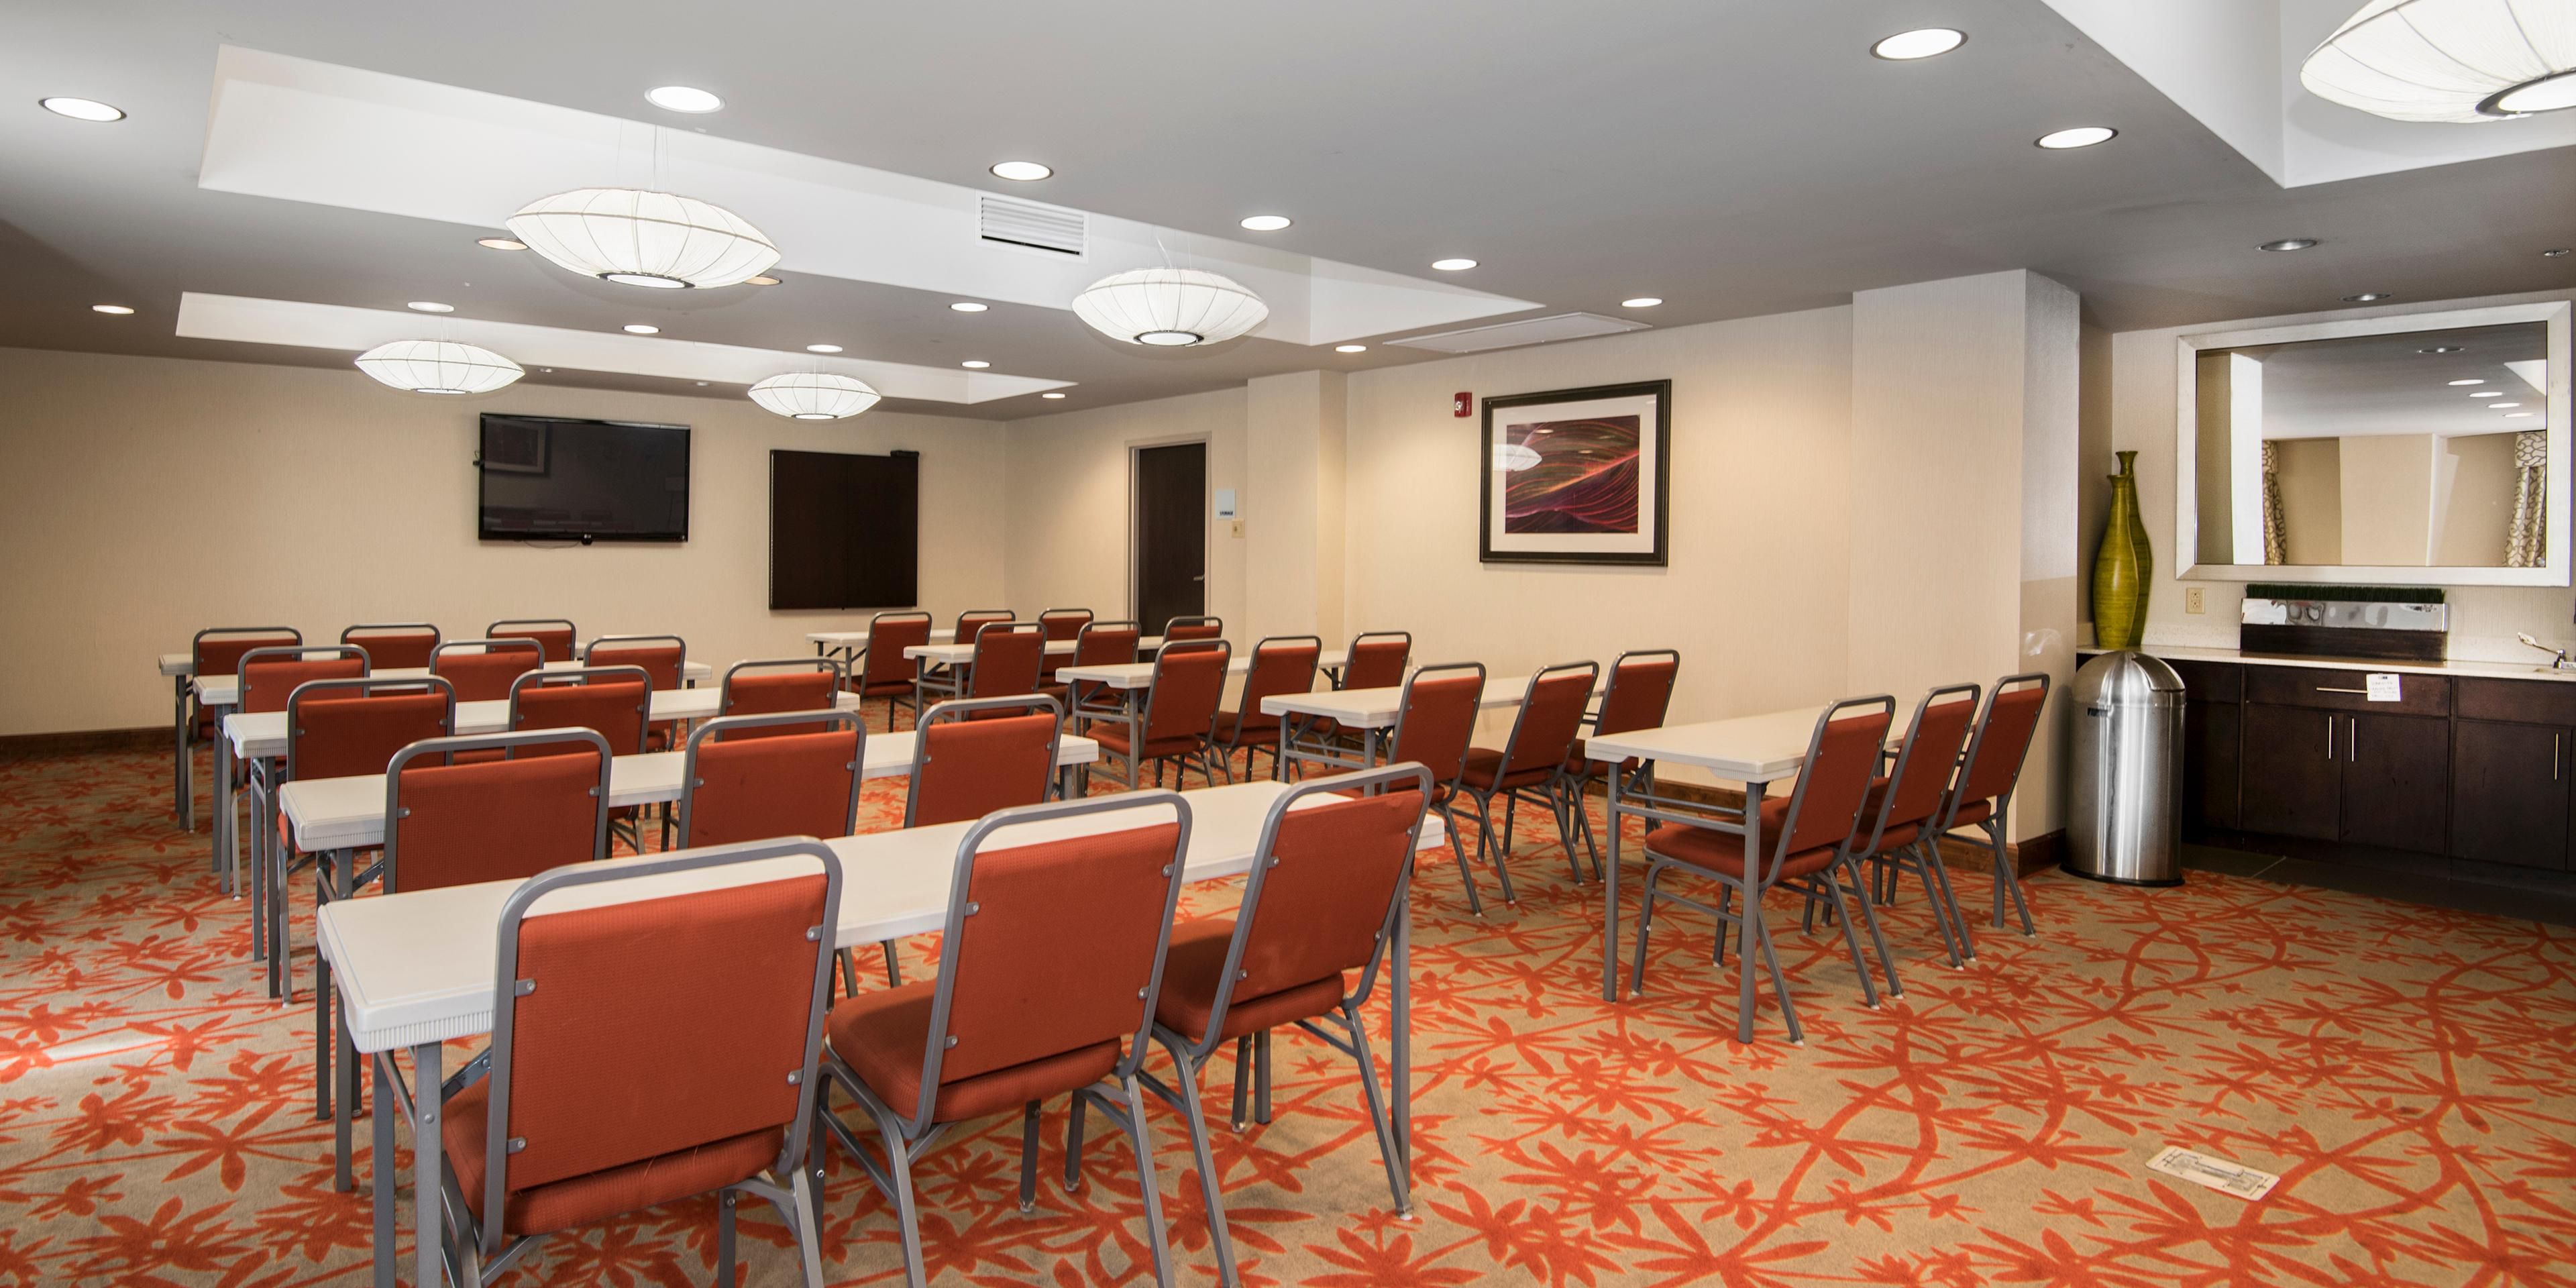 Our staff is ready to help you plan your next meeting in our comfortable meeting space.  We can accommodate meetings from 2 - 40 people.  Some audio visual equipment available.  